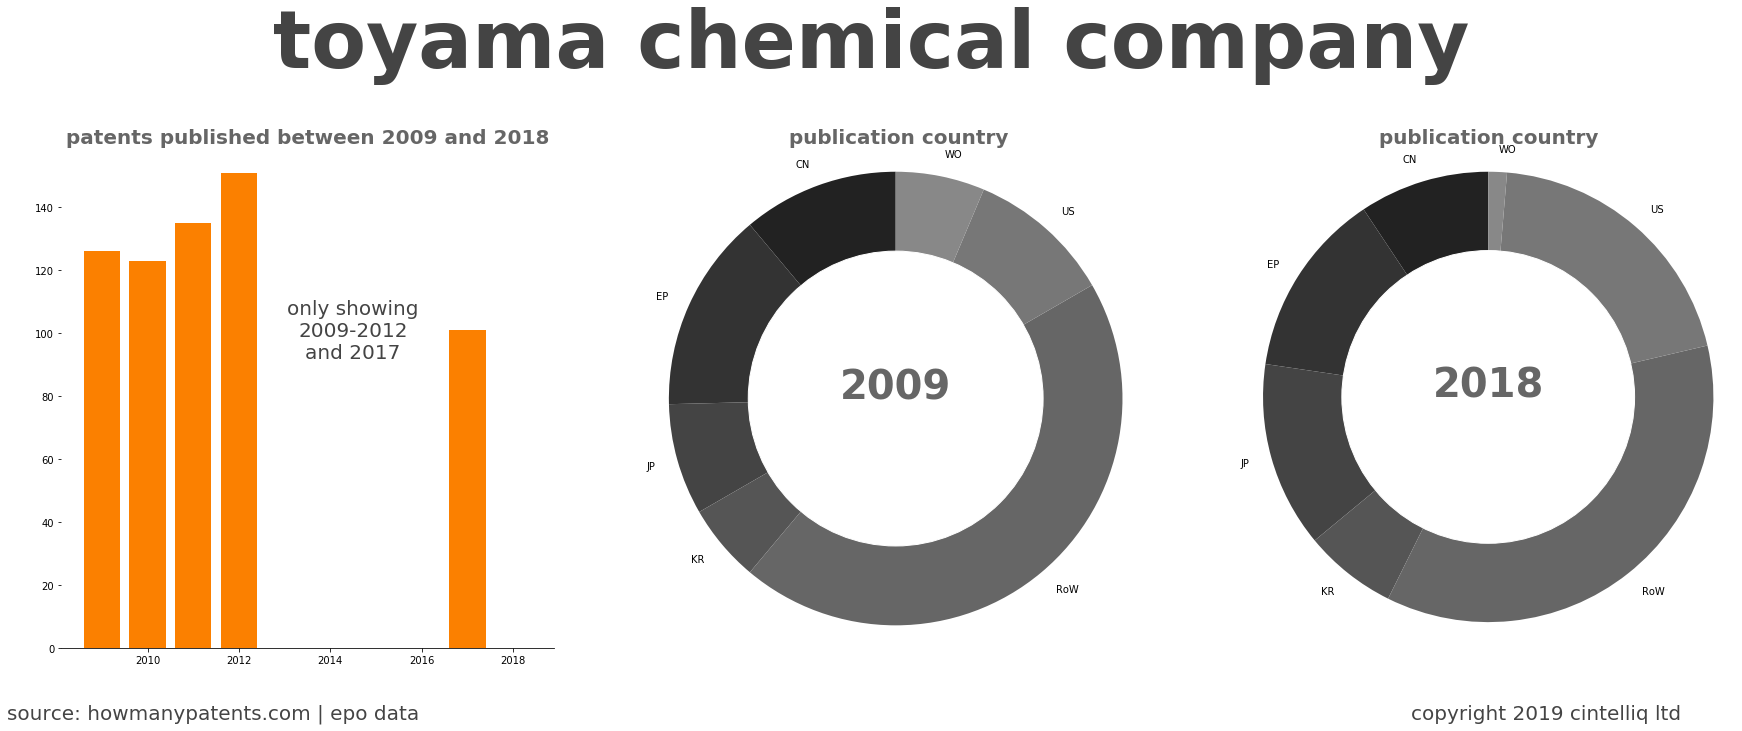 summary of patents for Toyama Chemical Company